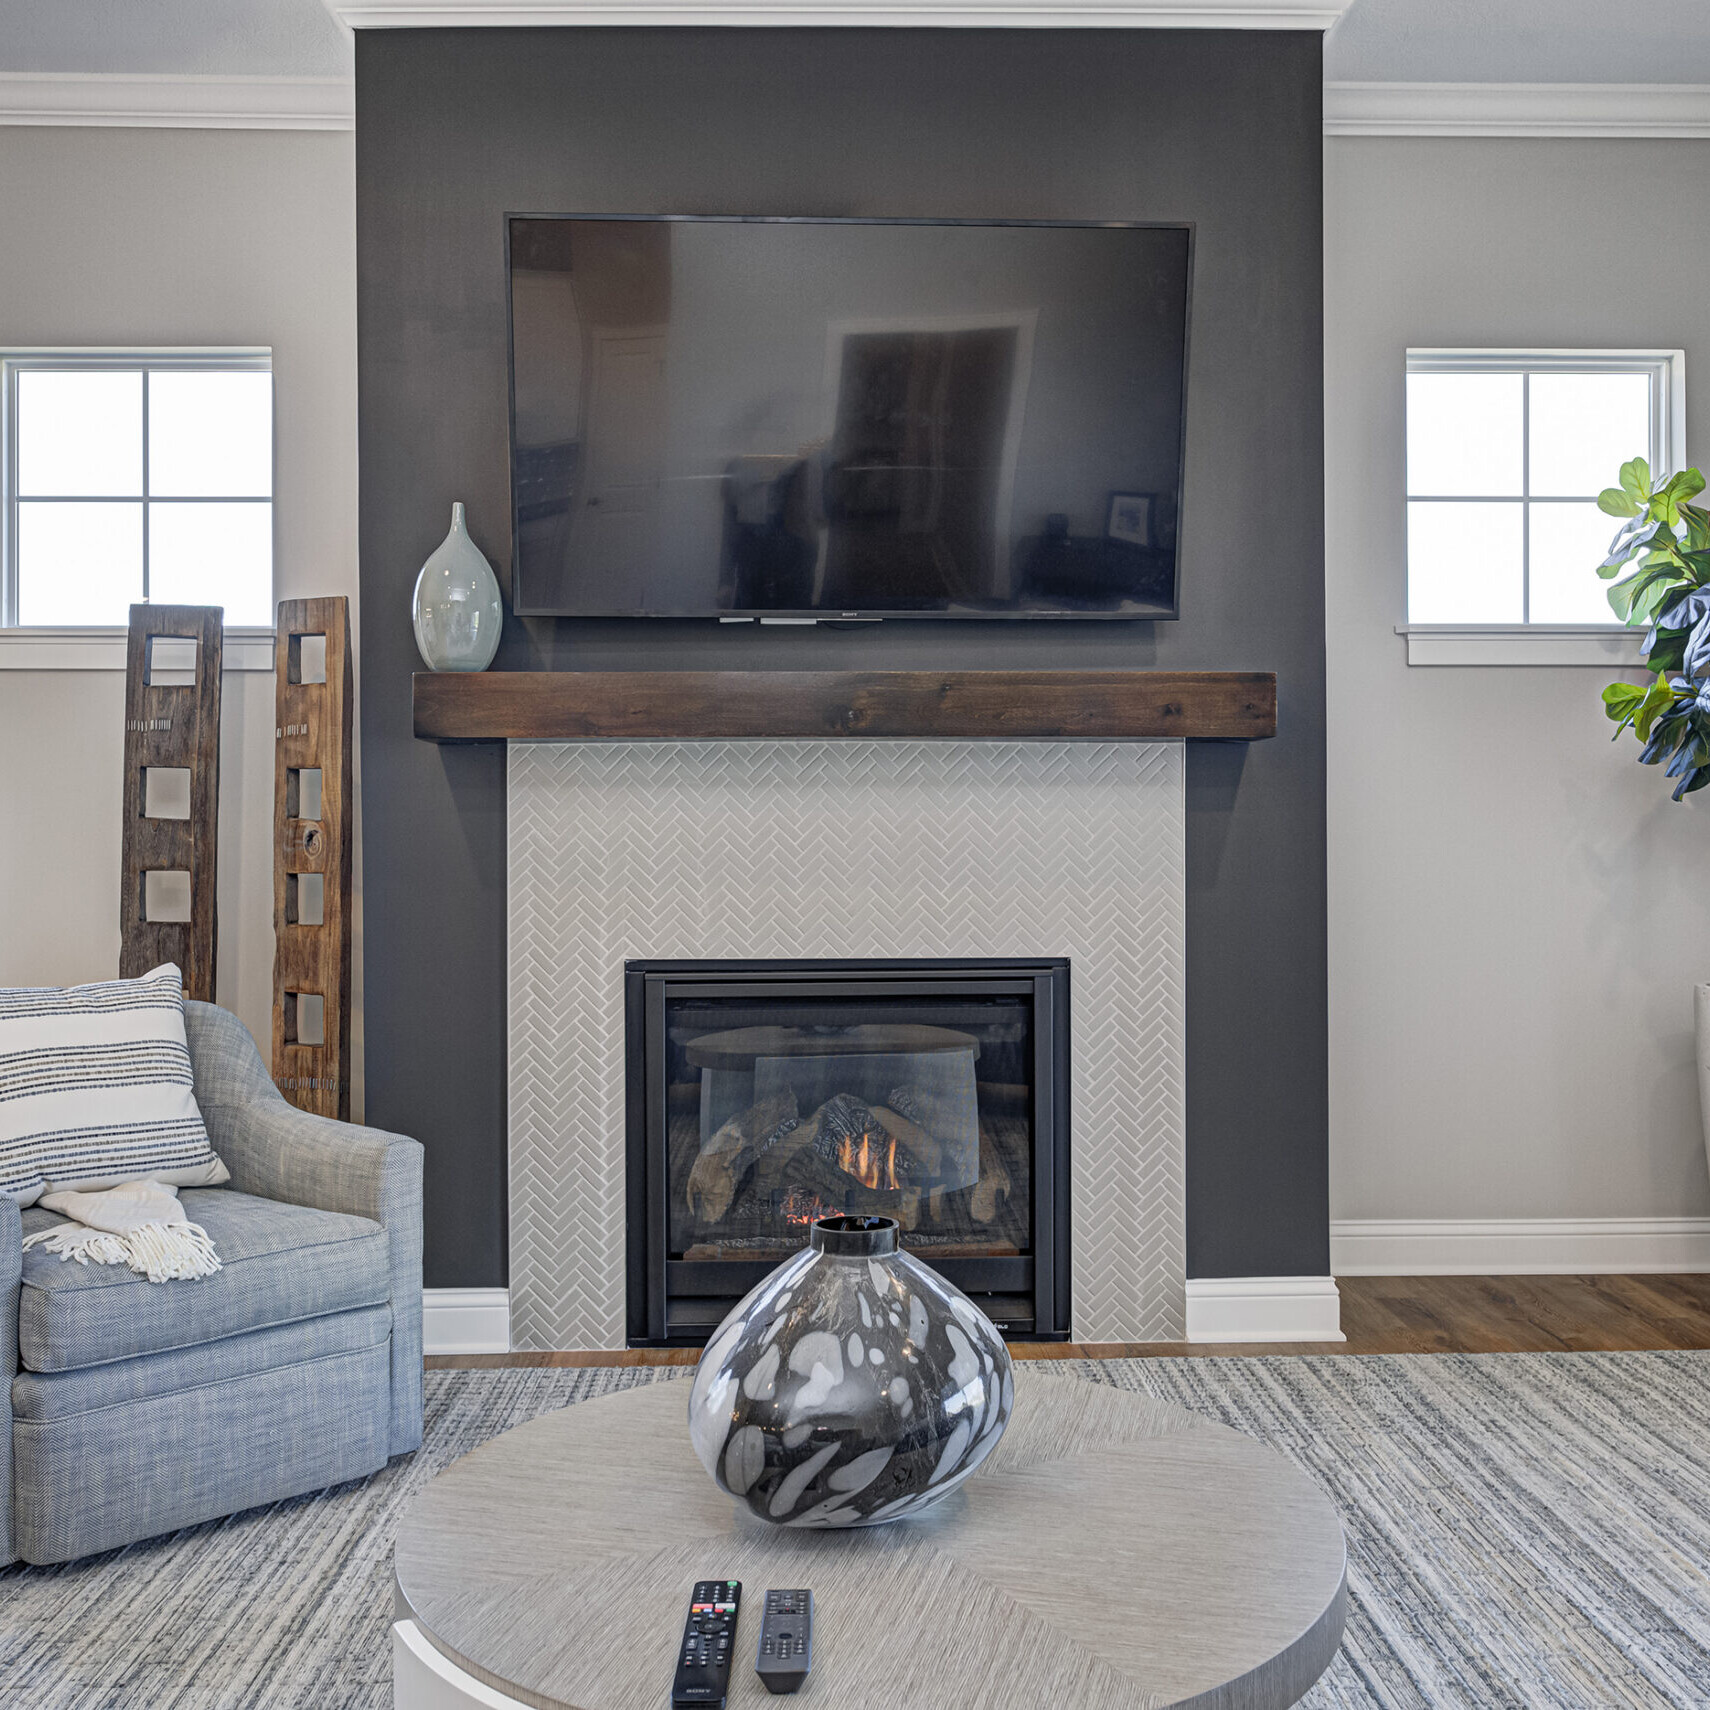 A living room with a tv above the fireplace in a Custom Home Builder Carmel Indiana.